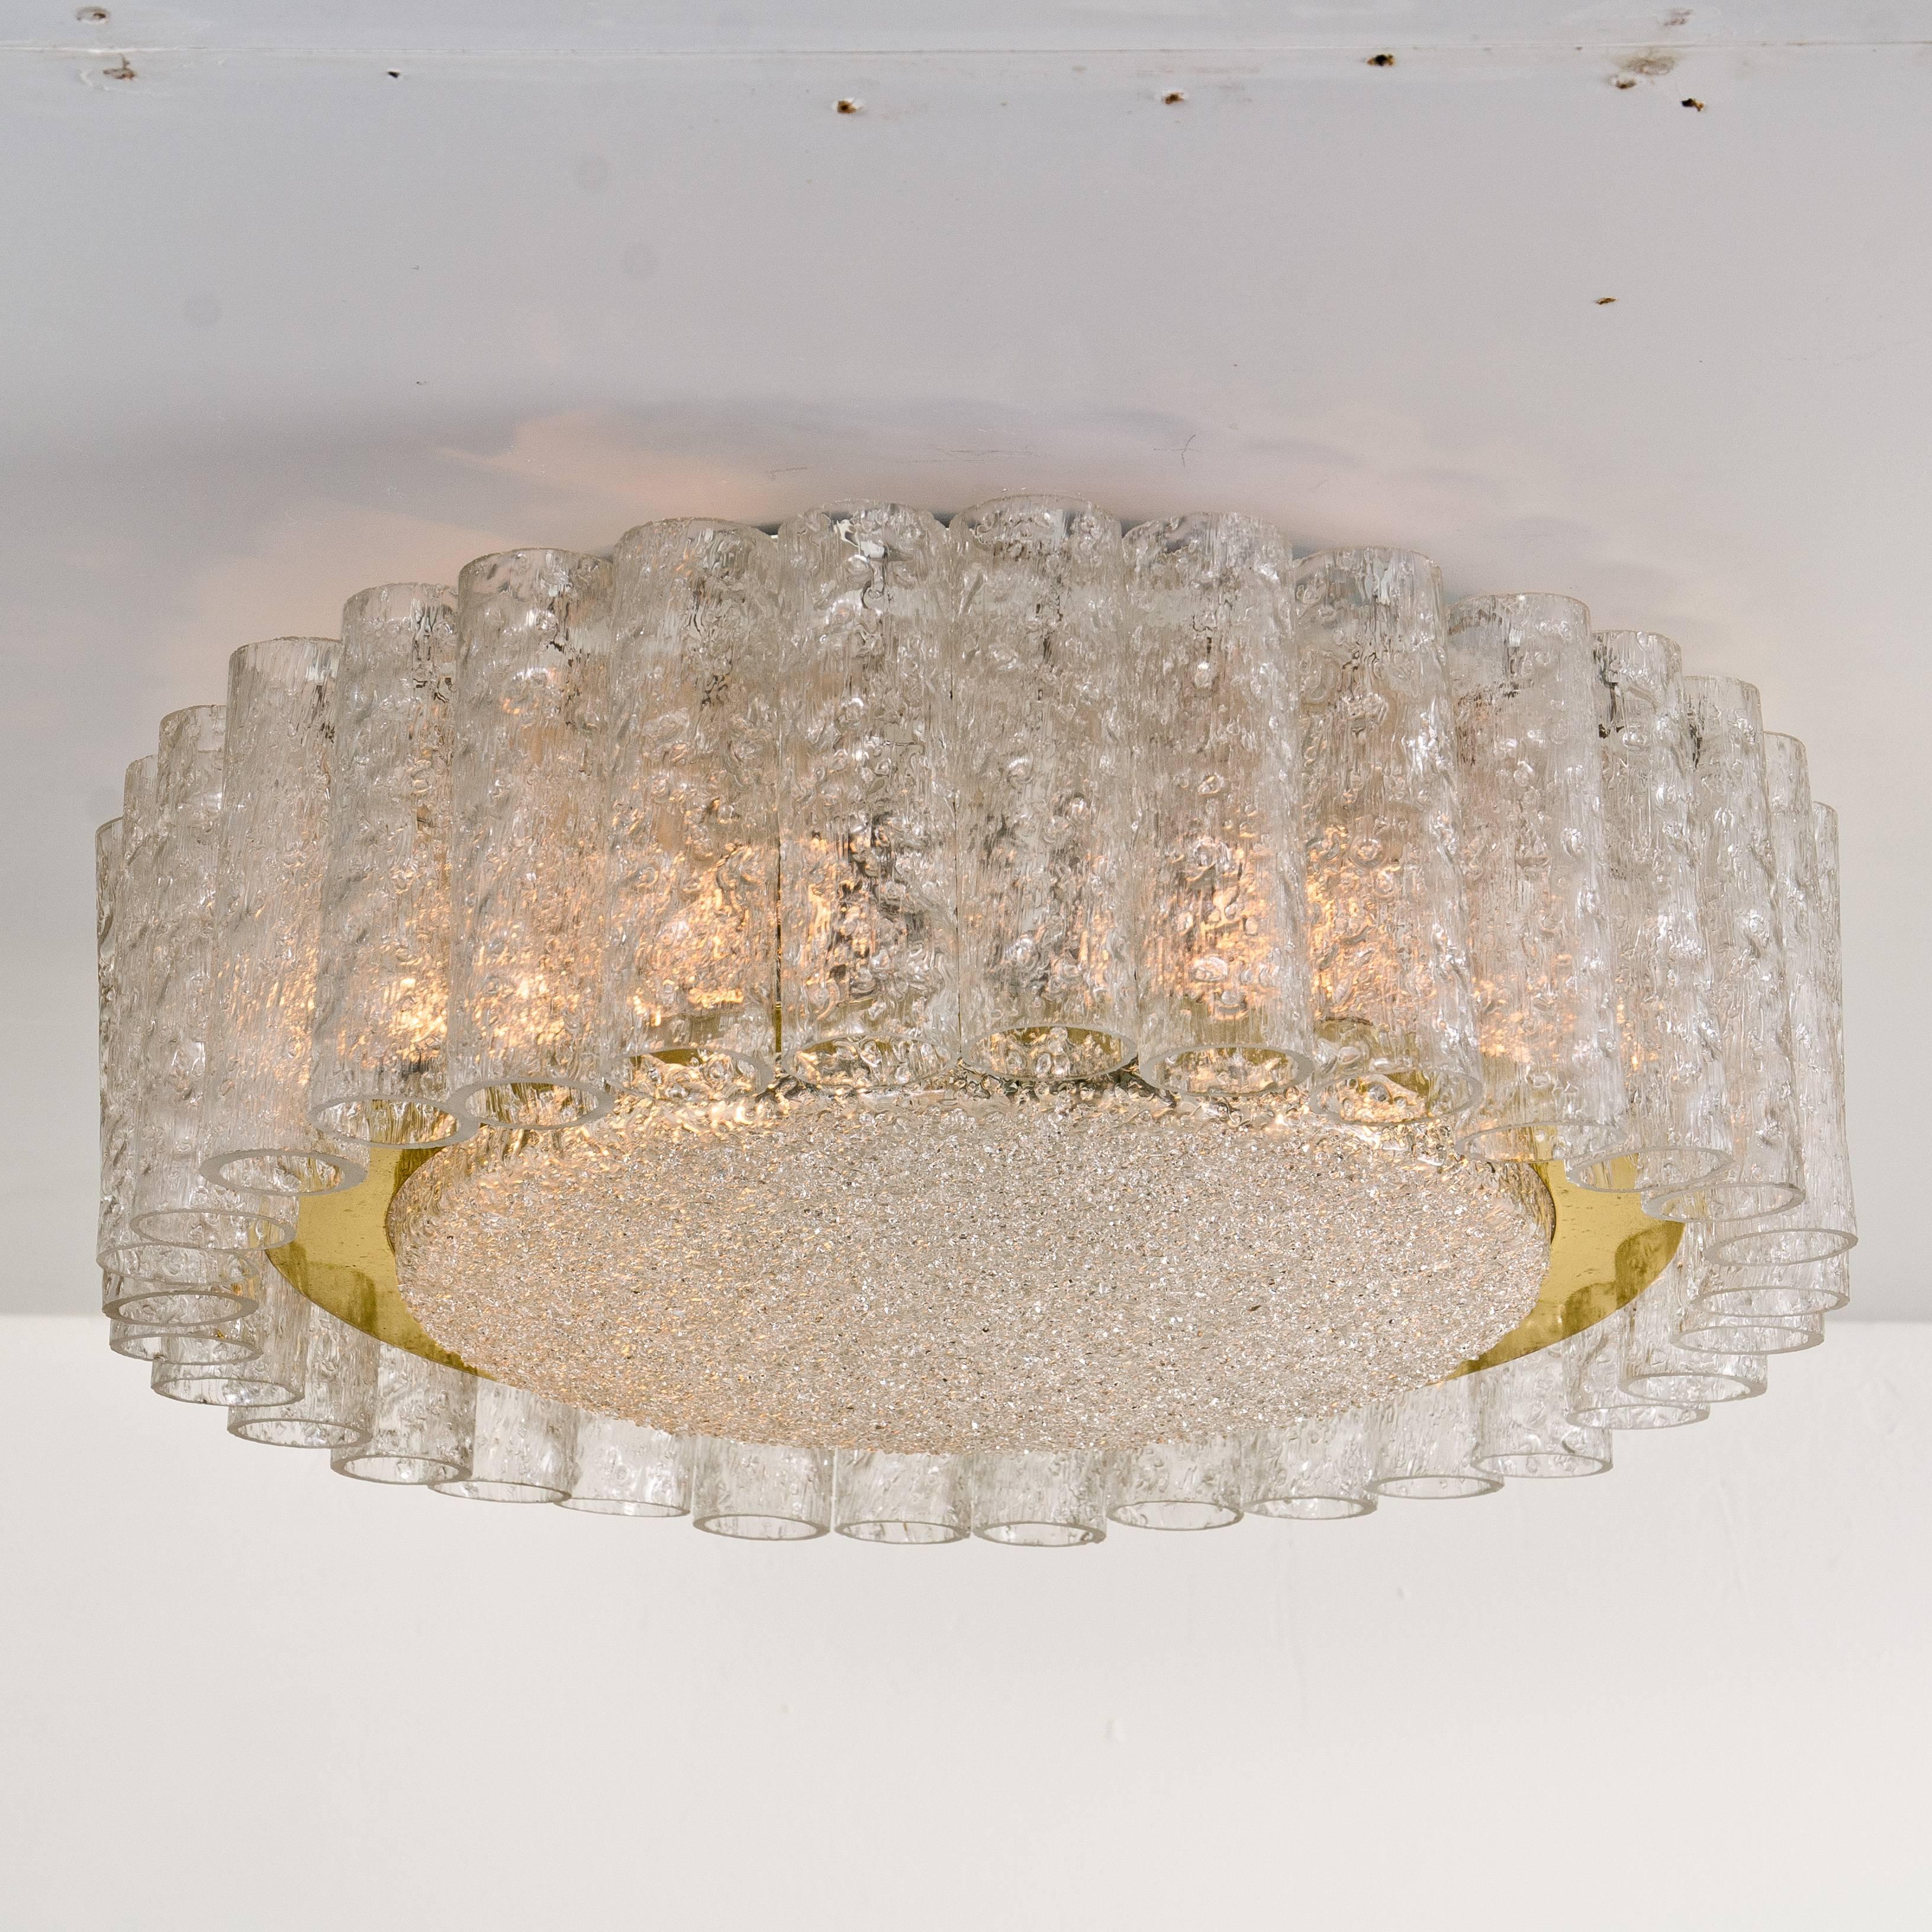 A extra large Doria flush mount chandelier, organic glass tubes surrounding a central glass diffuser mounted with minimal exposed hardware with a brass ring for a clean and elegant look.

The glass dishes of the fixtures  are made of 'Frit' glass - 